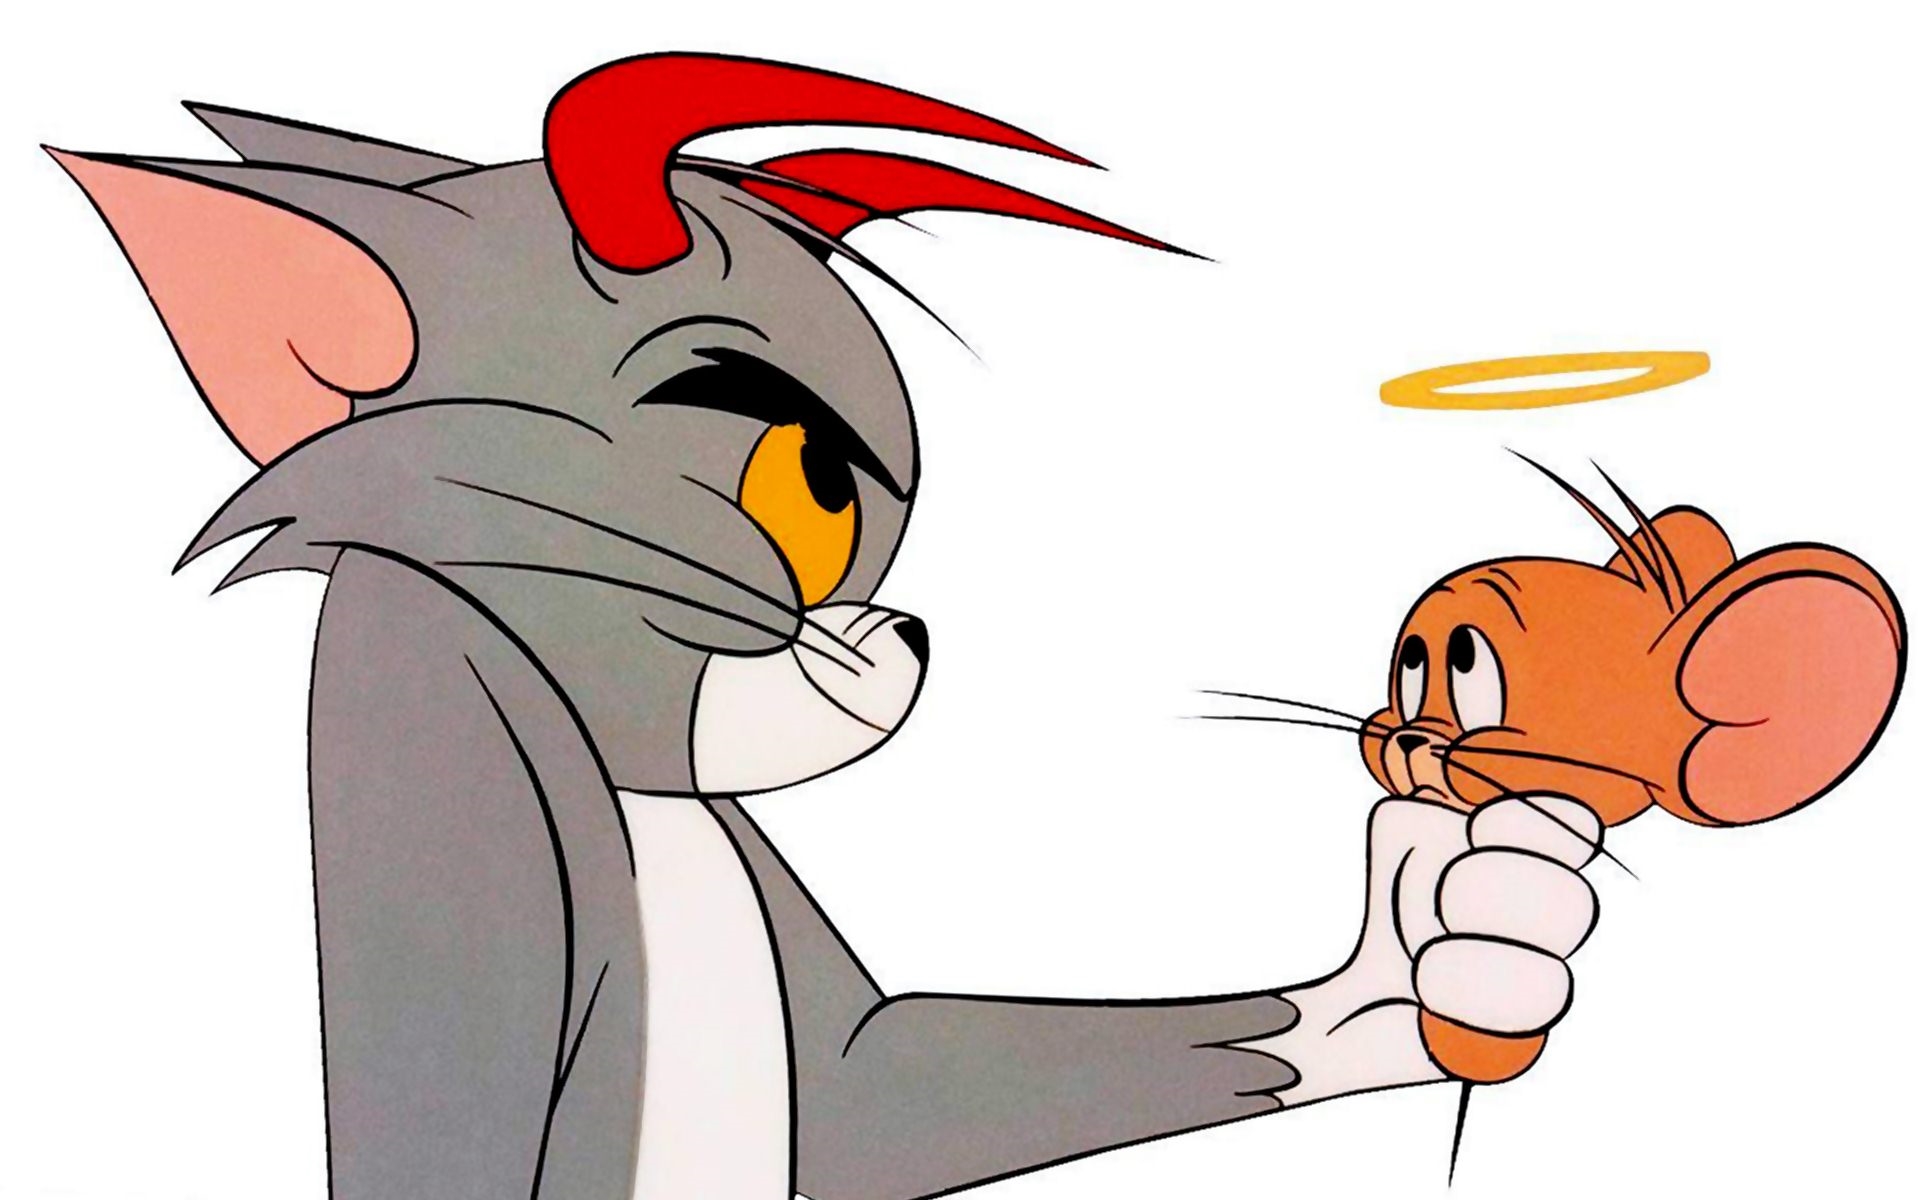 Aesthetic Tom And Jerry - 1920x1200 Wallpaper 